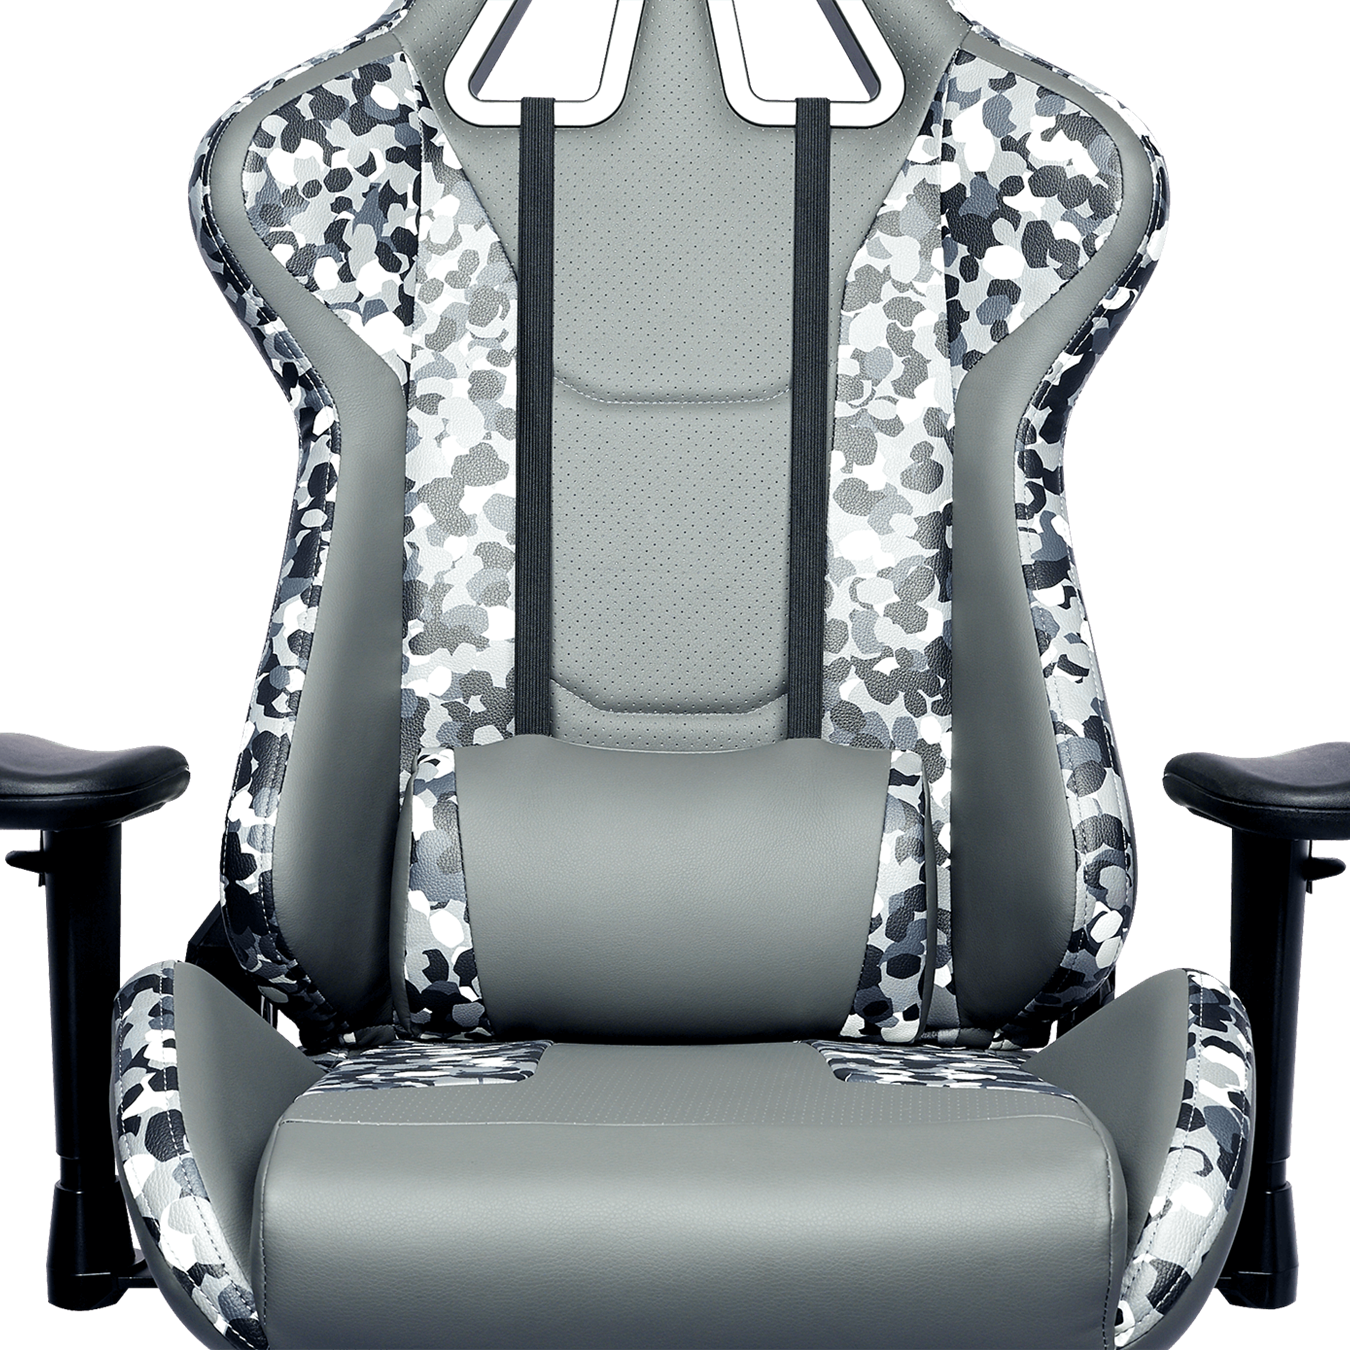 Caliber R1S Dark Knight CAMO Gaming Chair - The headrest and lumbar pillow will provide you with the best level of comfort to reduce back pain and alleviate neck strain.